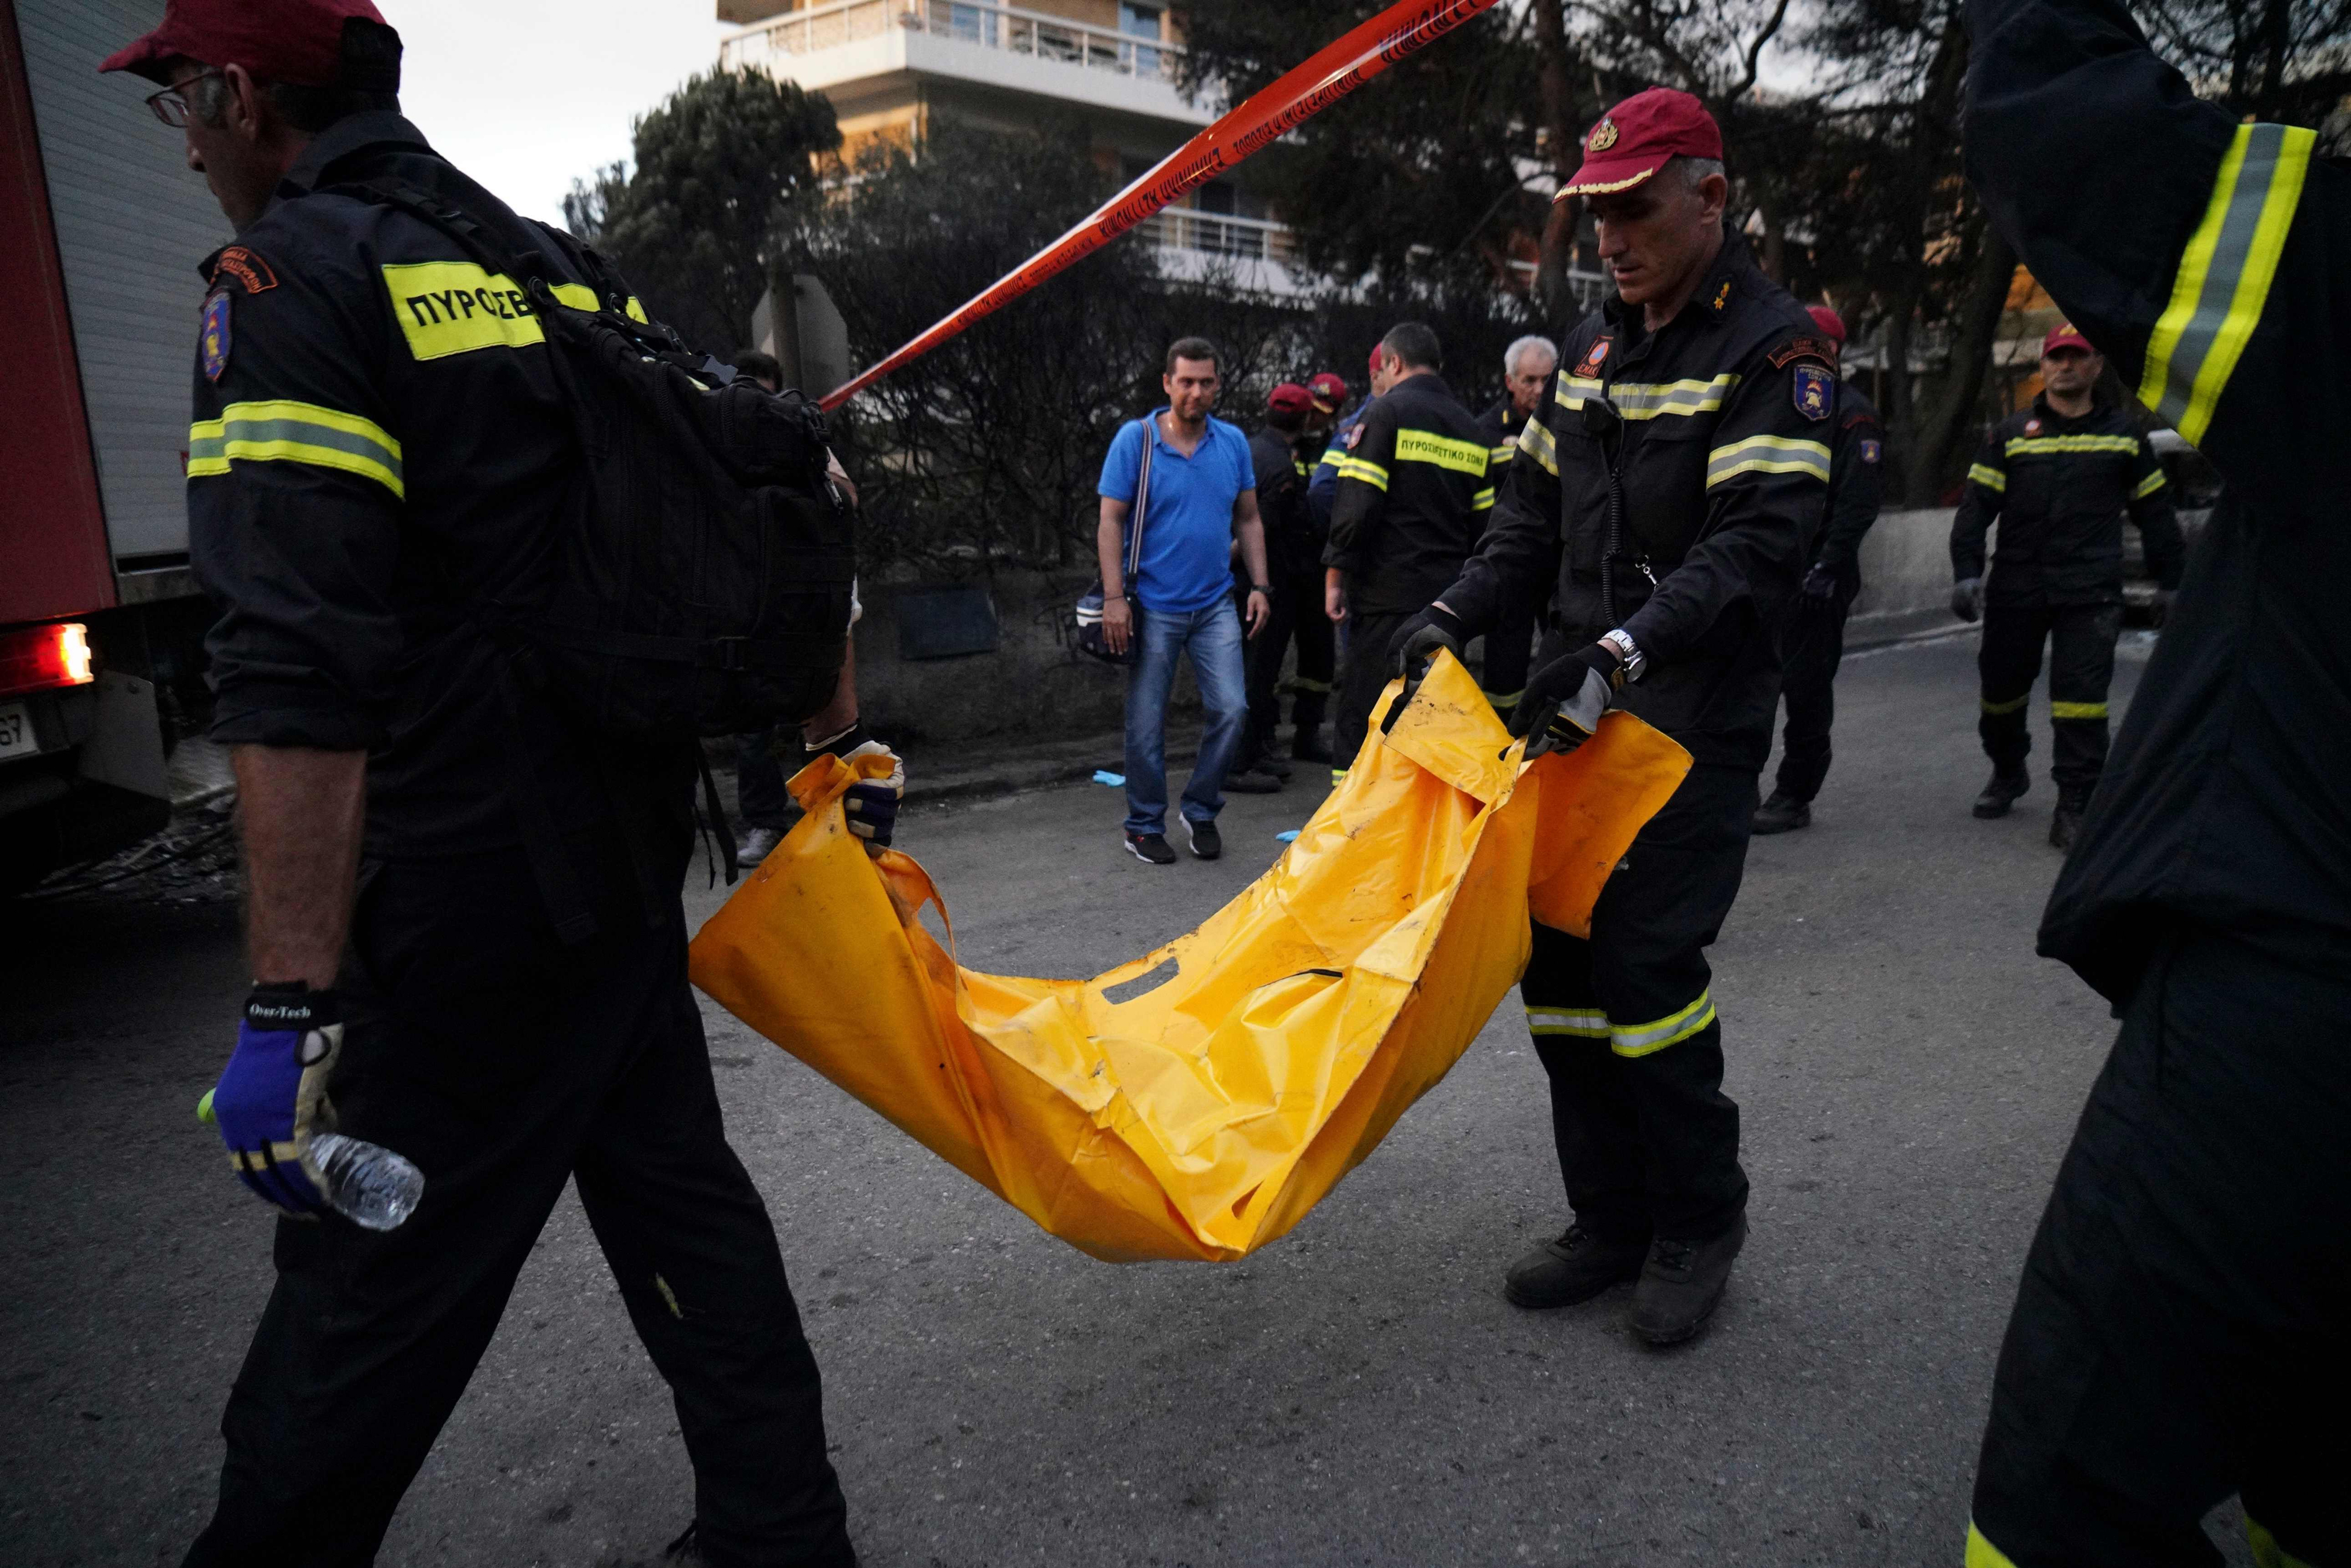 Firefighters transport a body in Mati on July 24, 2018. (AFP/Getty Images)